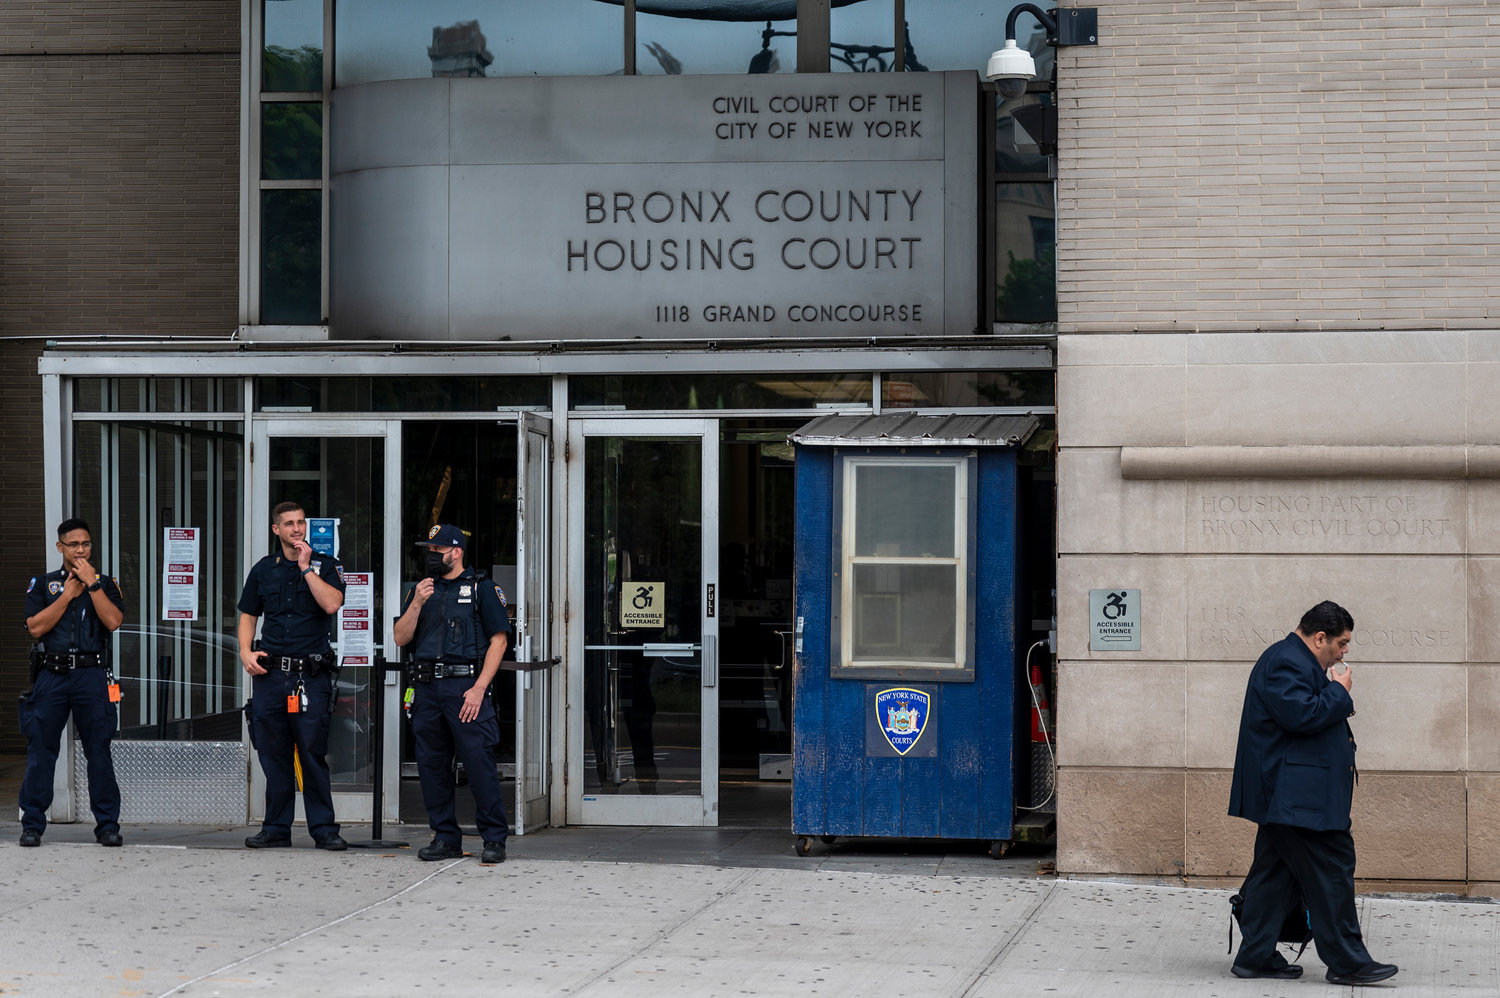 Security guards stand watch at the entrance to Bronx Housing Court Wednesday, Sept. 7, on Grand Concourse and E. 166th St. The court is the only one in the city continuing to conduct virtual intake and Right to Counsel eligibility screening for more than 3,000 eviction filings every month—by far the highest filing rate of any county in New York state.